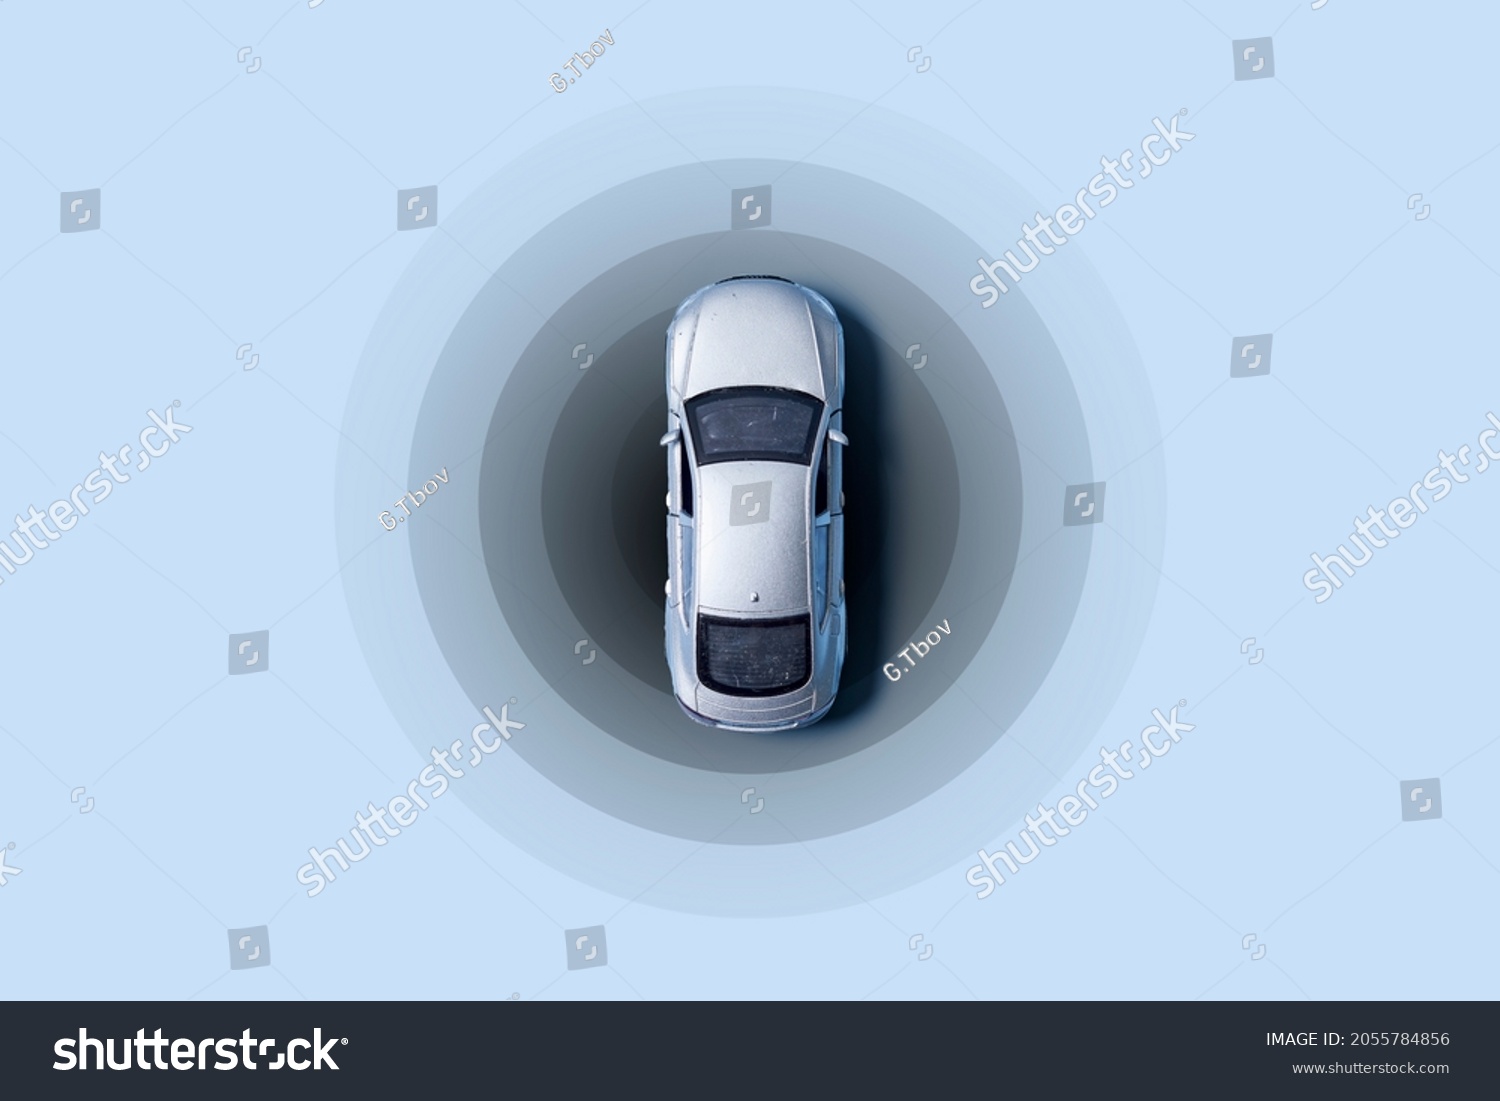 Automobile with gps tracking pulsing signal. A vehicle transmitting gps signal. Searching car location with gps tracker. #2055784856